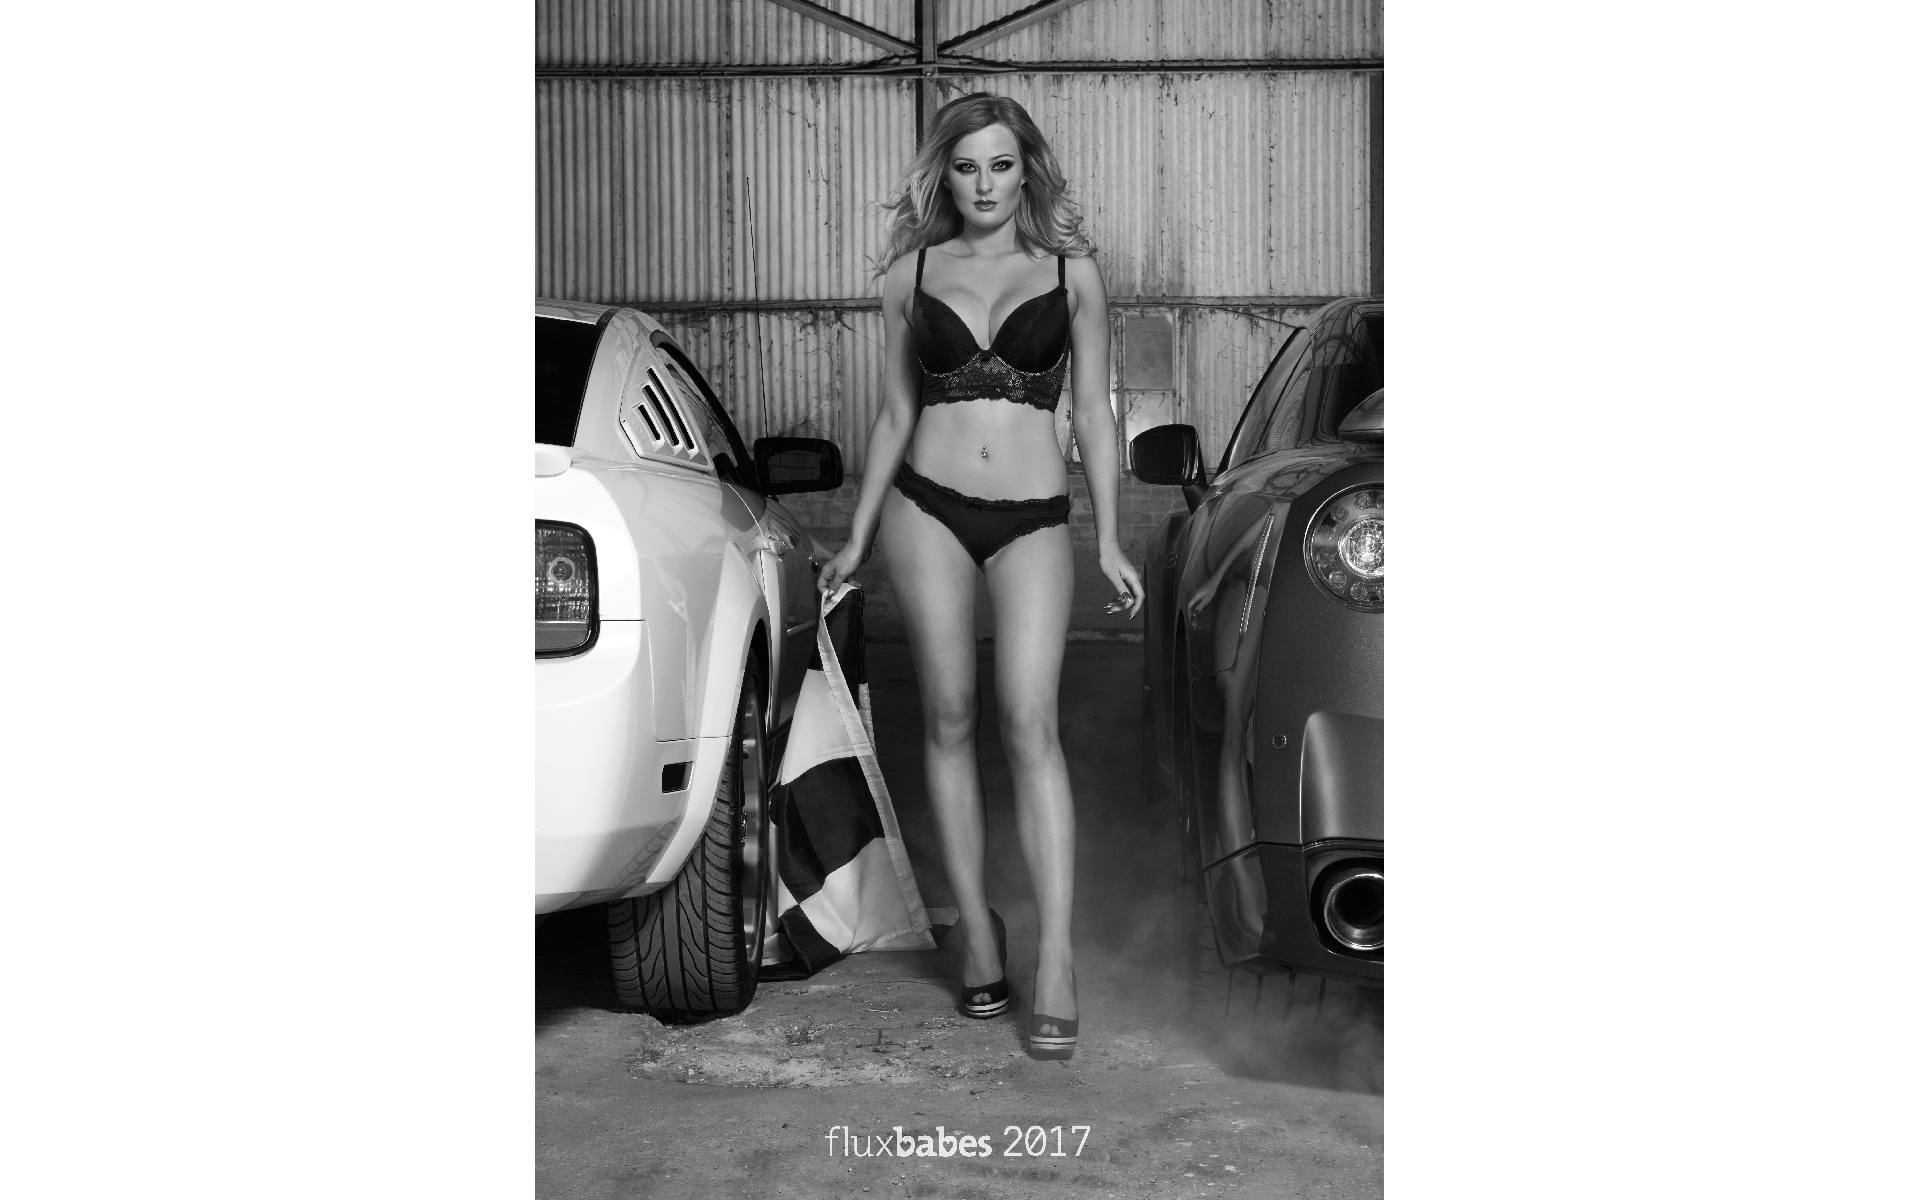 Glamour model in her underwear front of 2 cars in a garage in black and white calendar photo shoots 